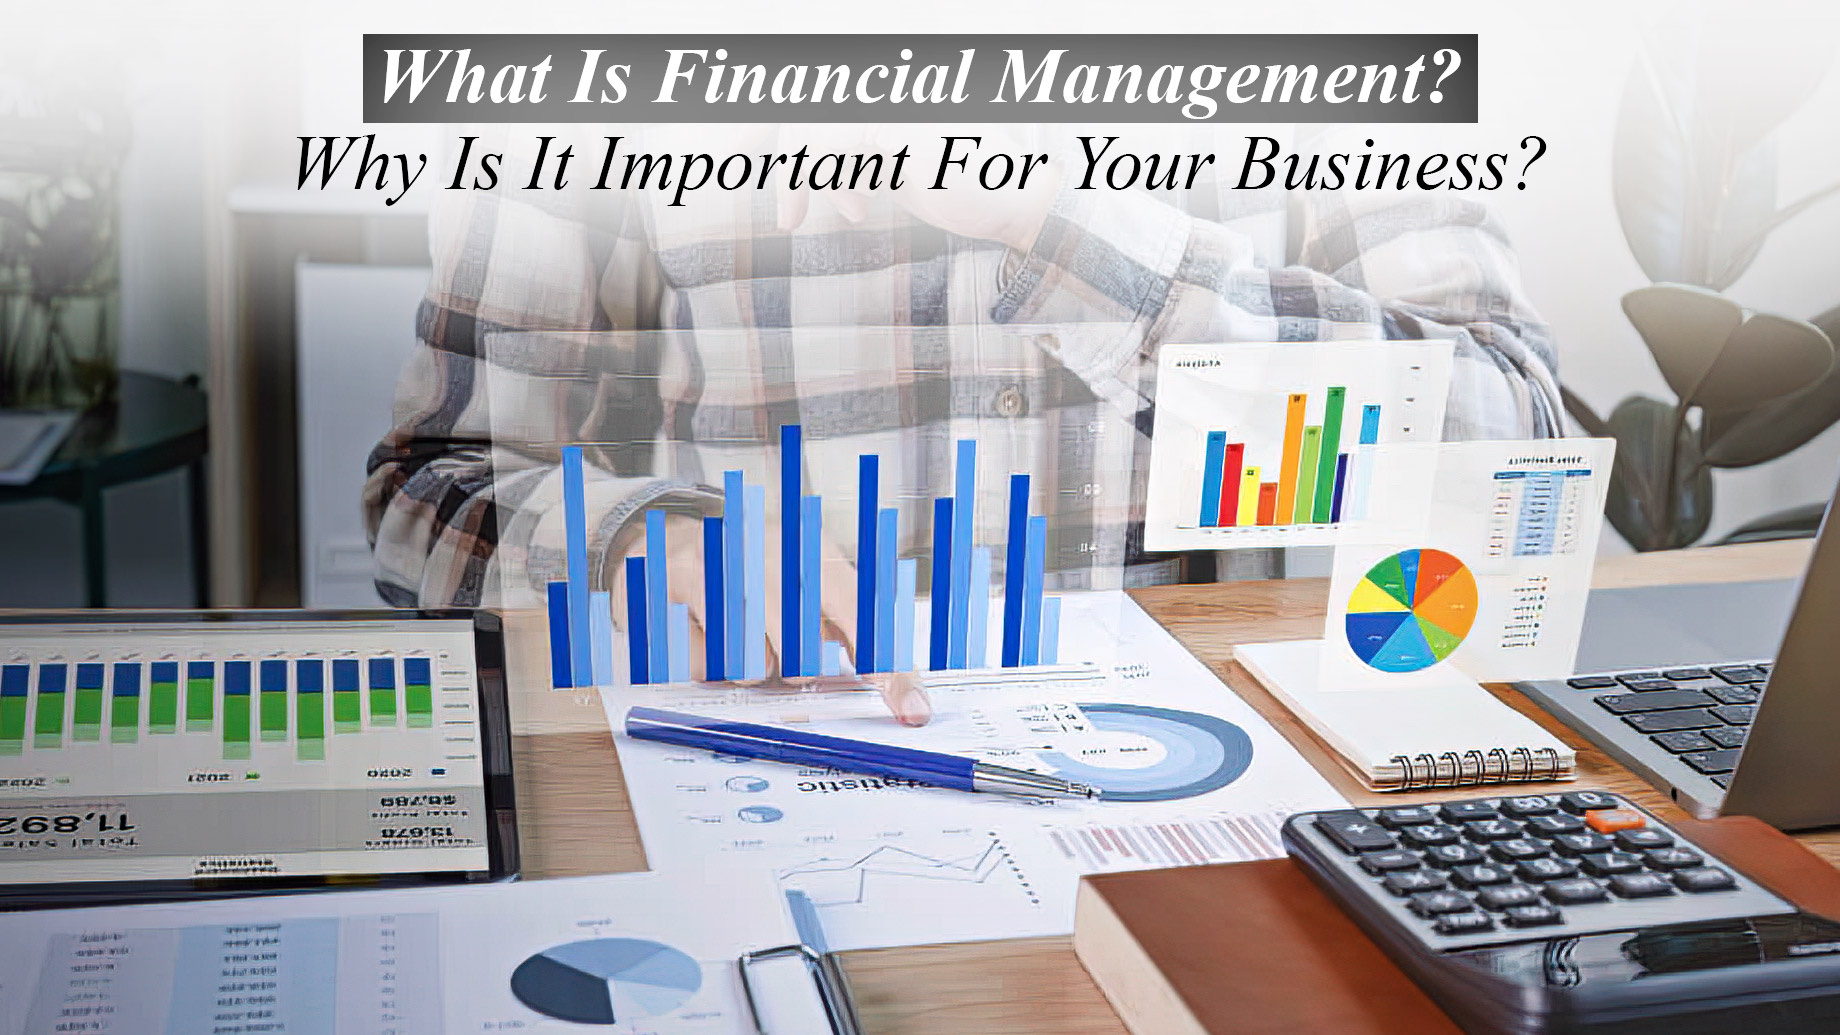 What Is Financial Management? Why Is It Important For Your Business?